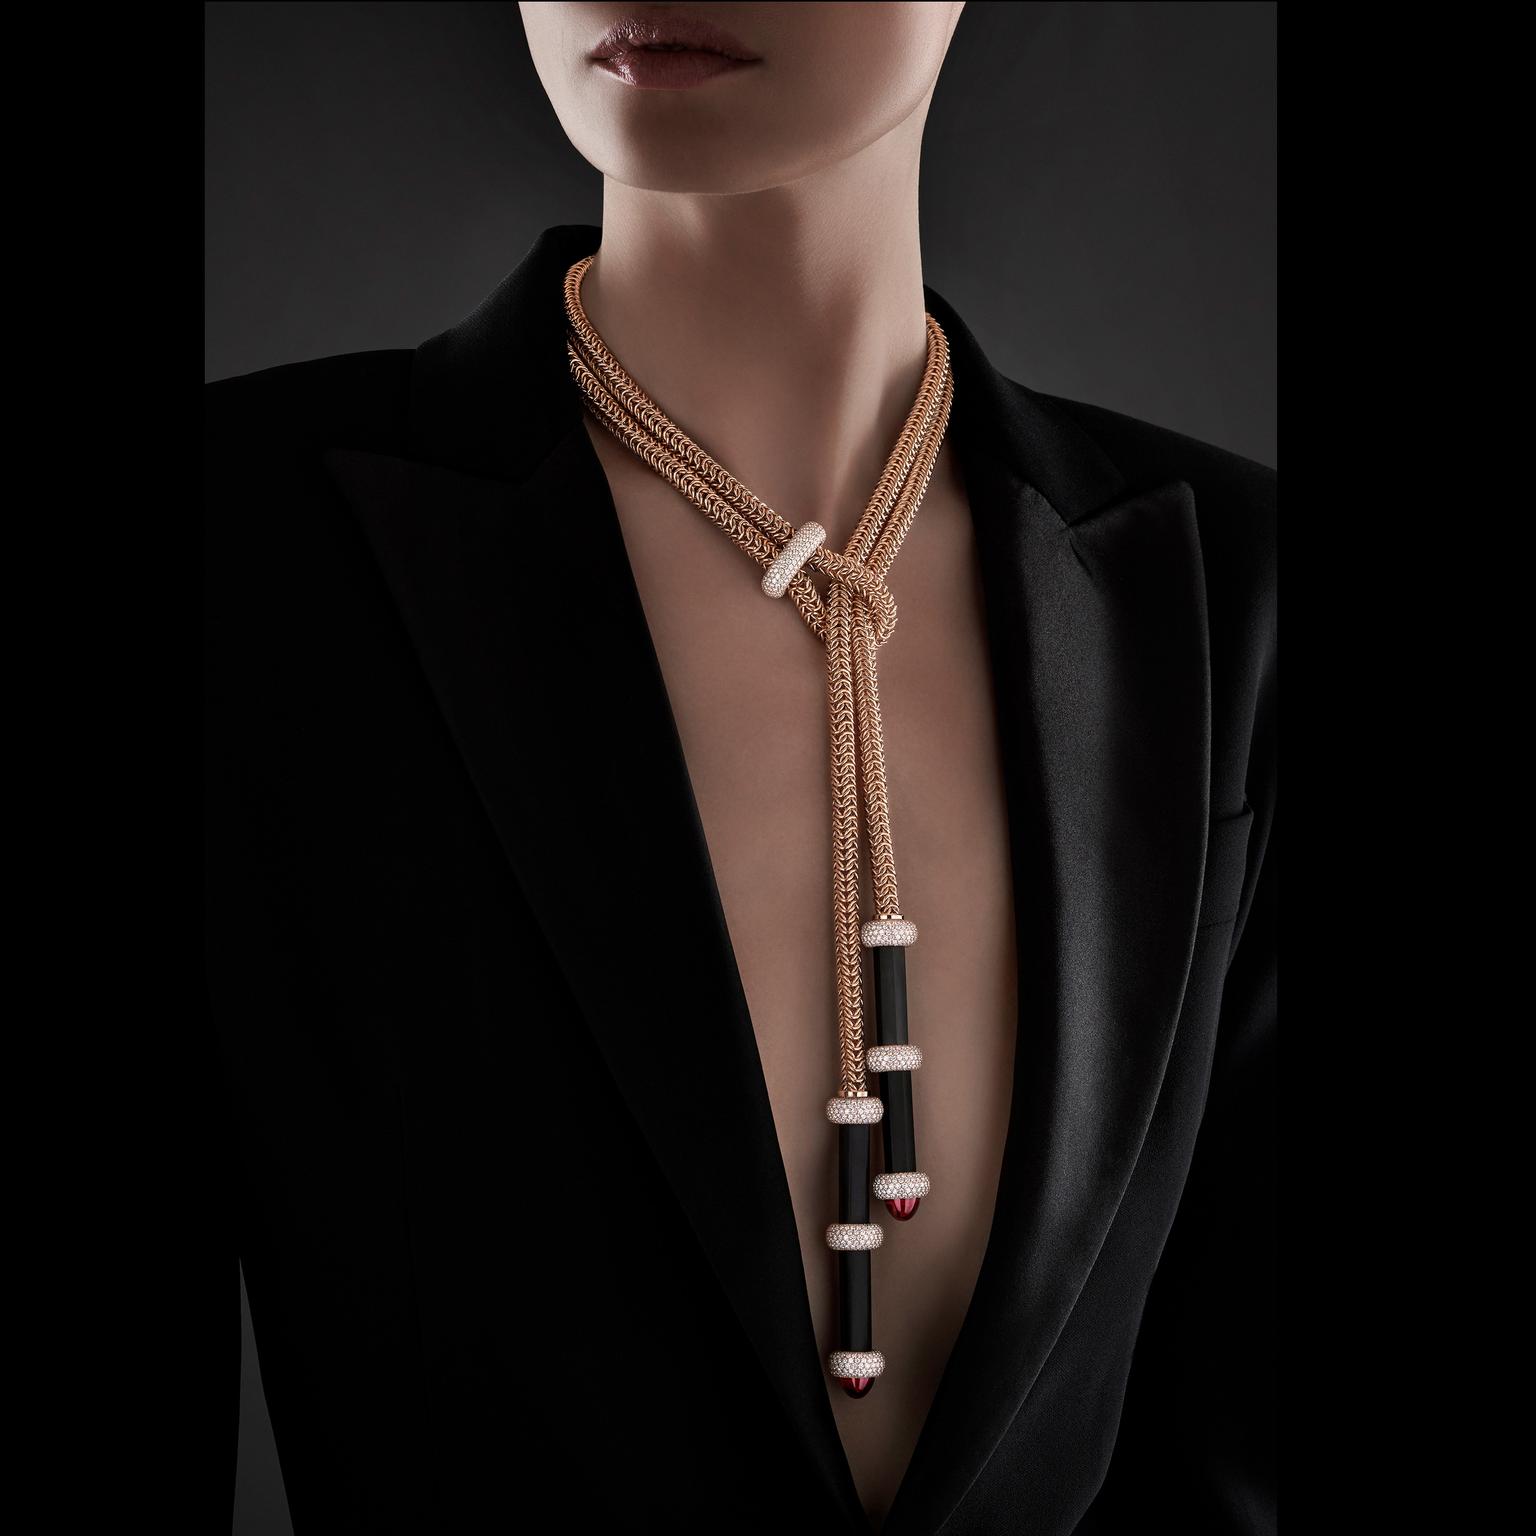 Discoveries in the Darkness Velvet Tie Chain necklace by Pomellato on model